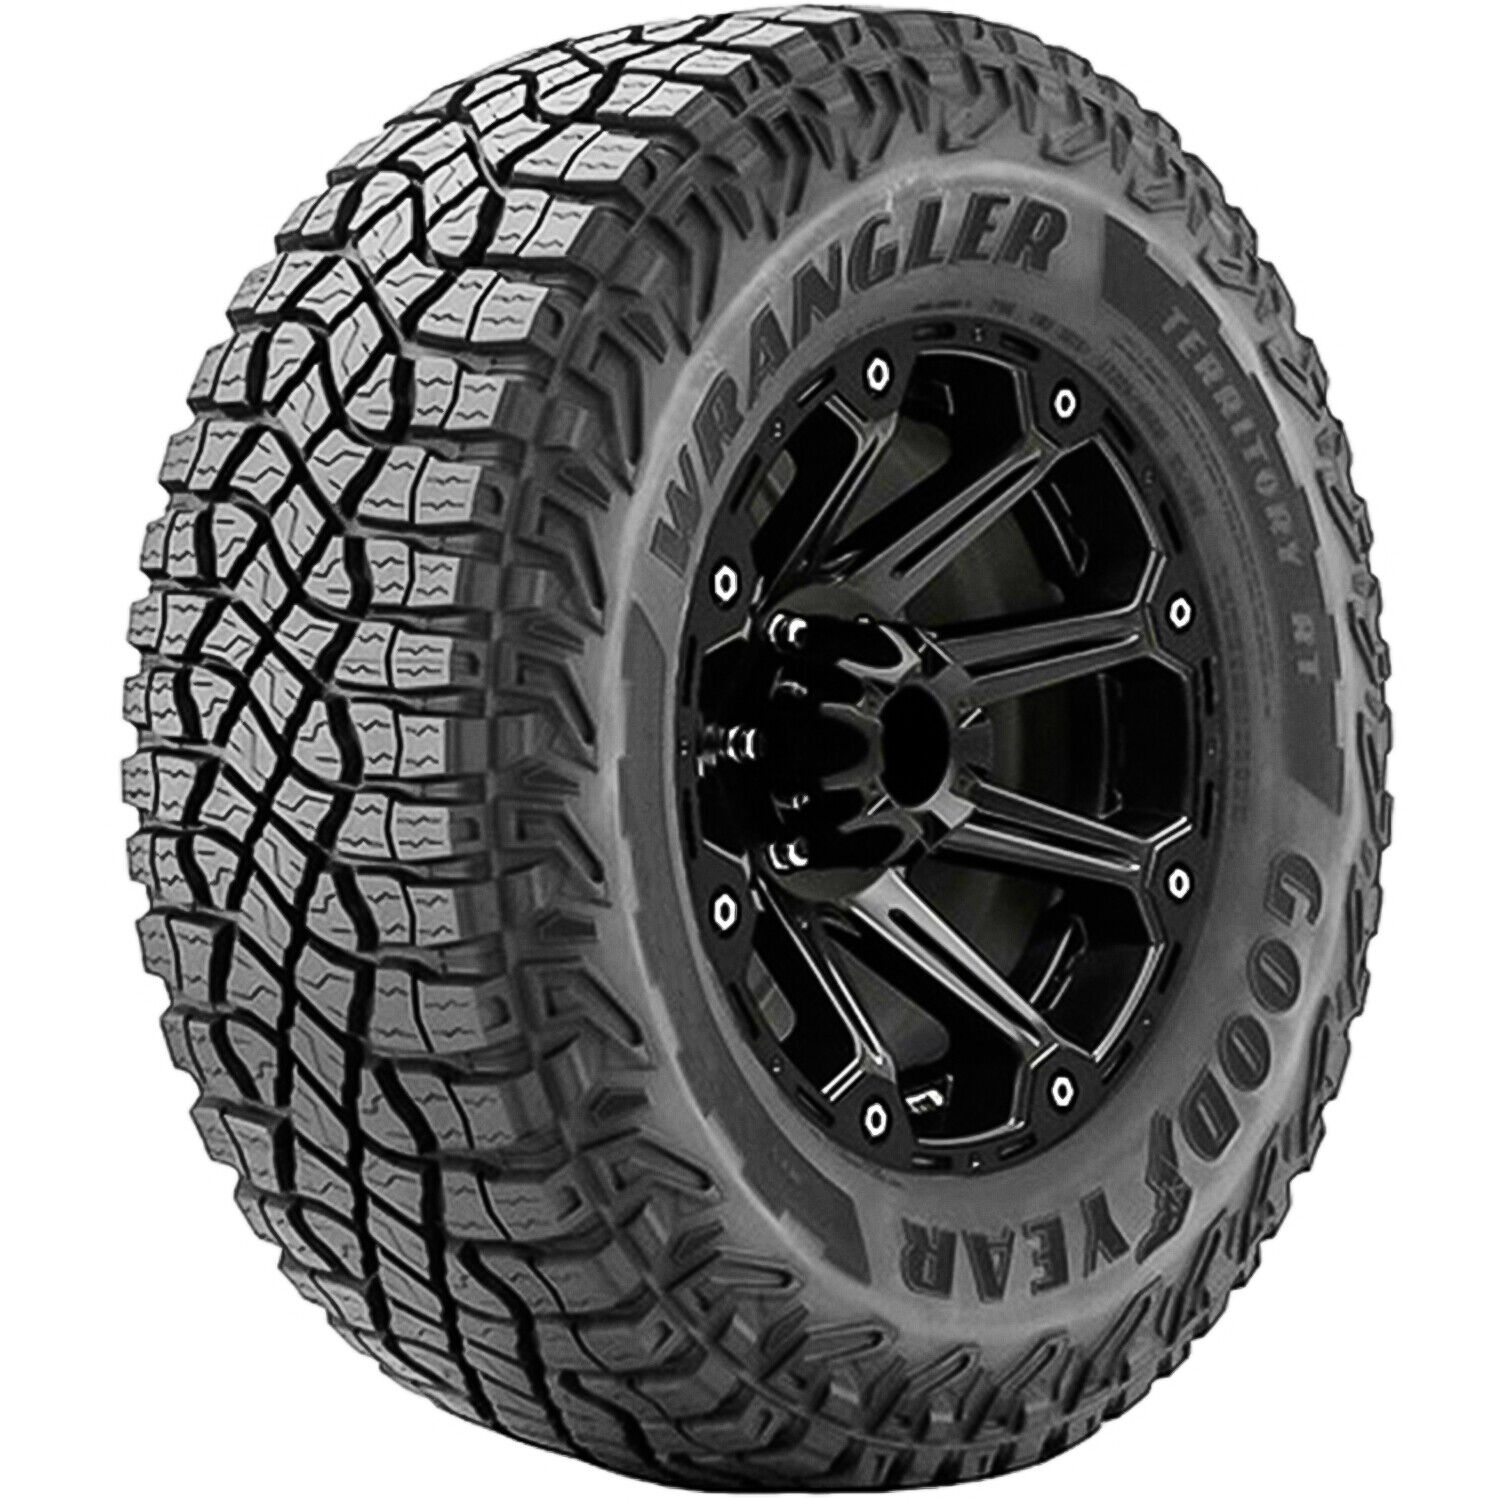 Goodyear Wrangler Territory A/T LT 325/65R18 Load D 8 Ply AT All Terrain Tire